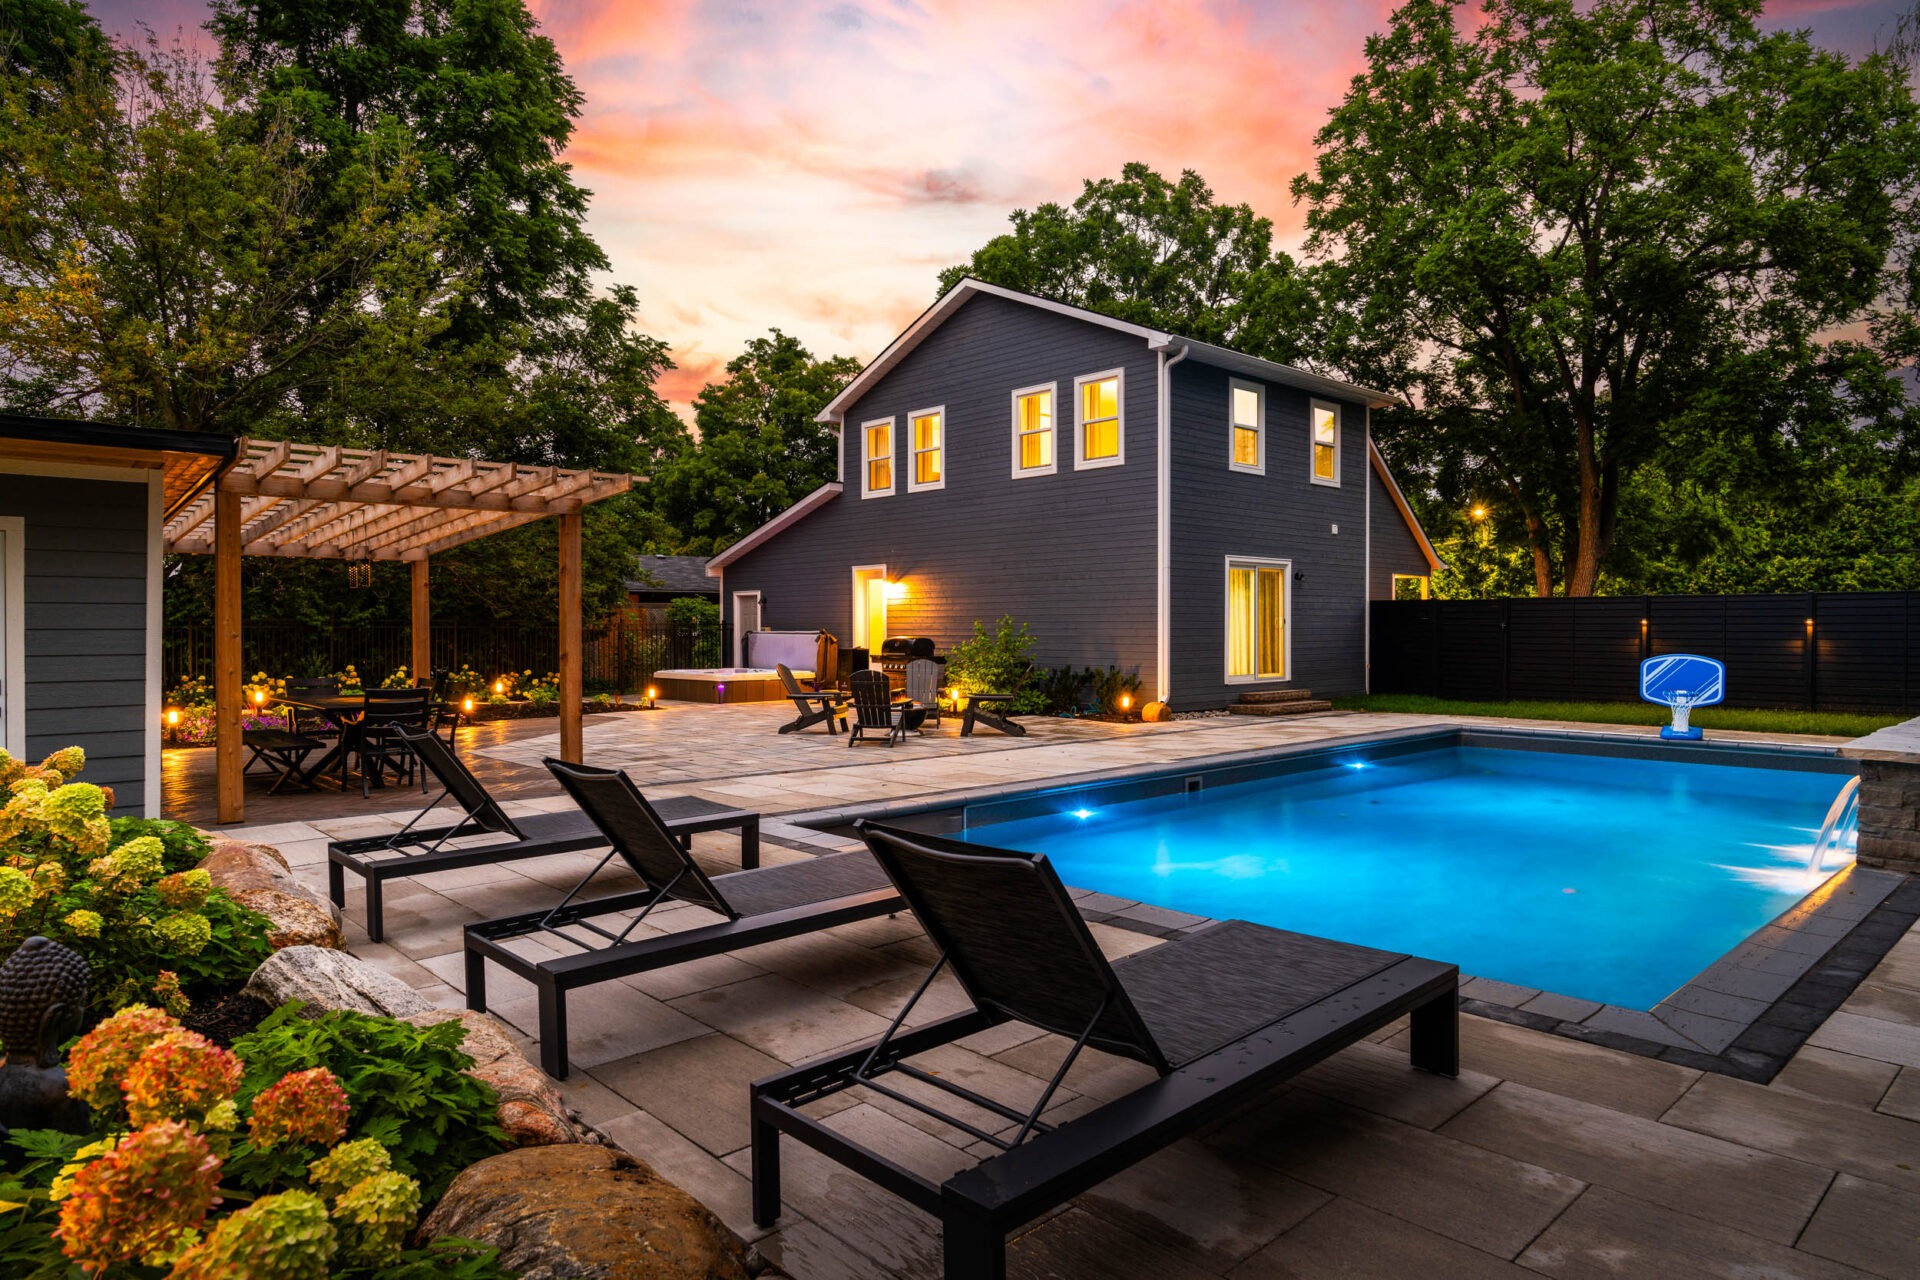 An inviting backyard at dusk with a pergola, outdoor dining, illuminated swimming pool, loungers, a two-story house, and vibrant sunset sky.